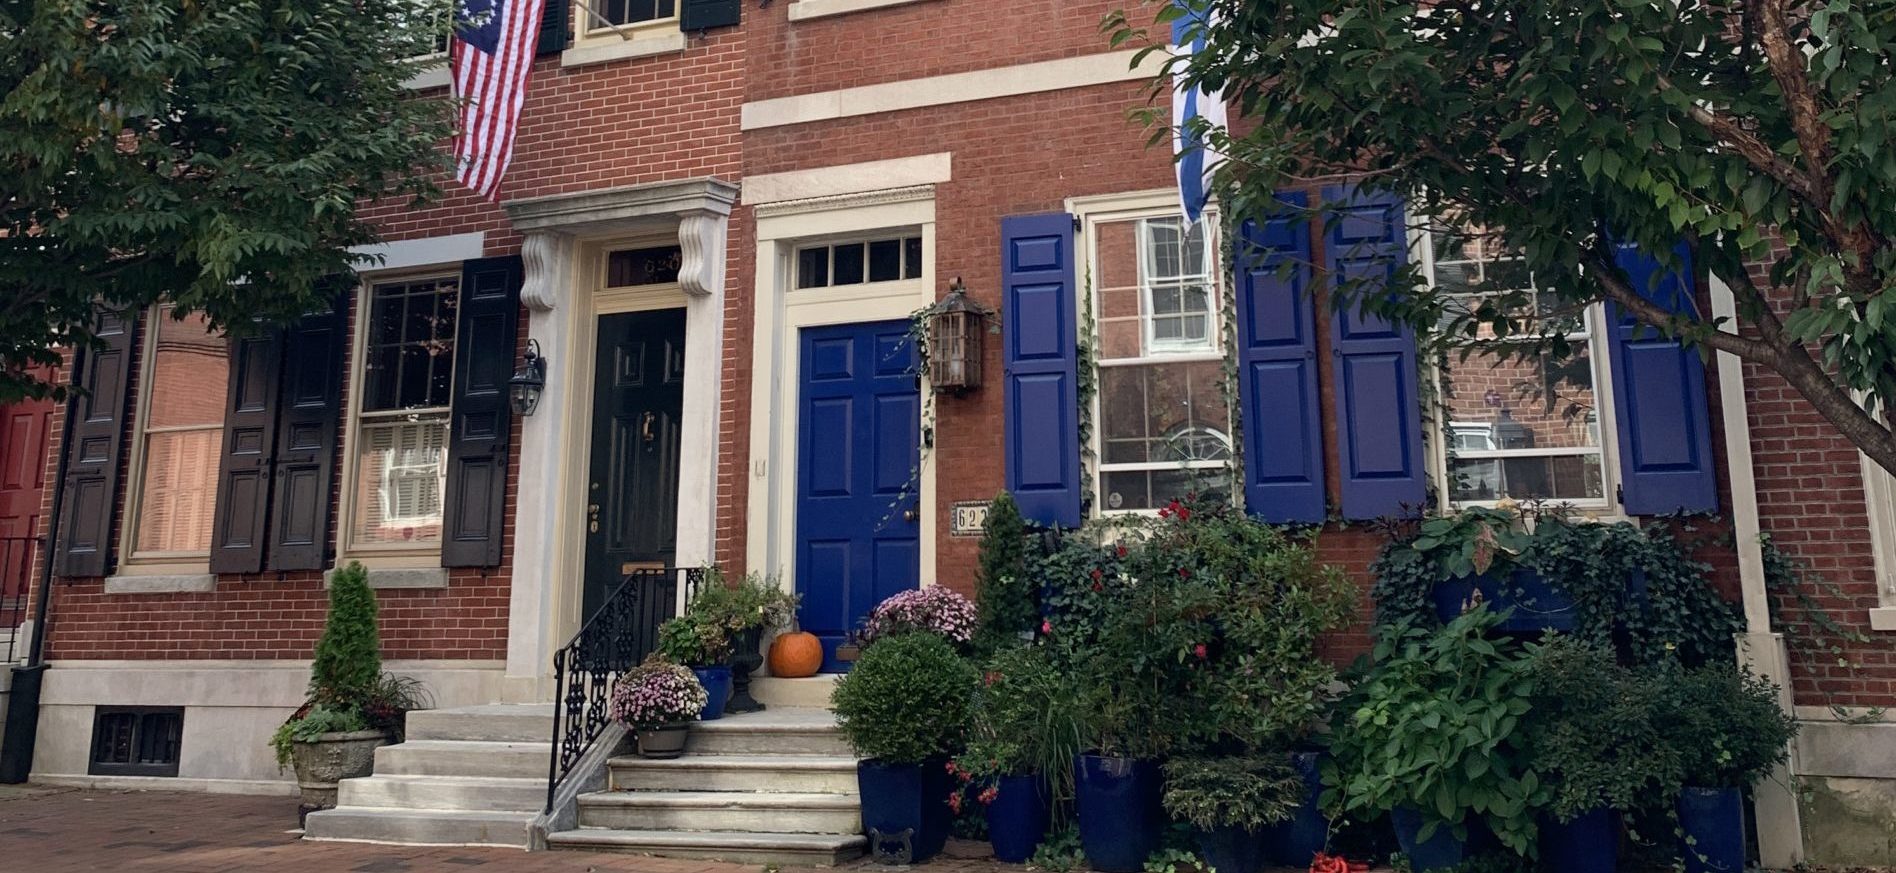 Philadelphia townhome with blue shutters